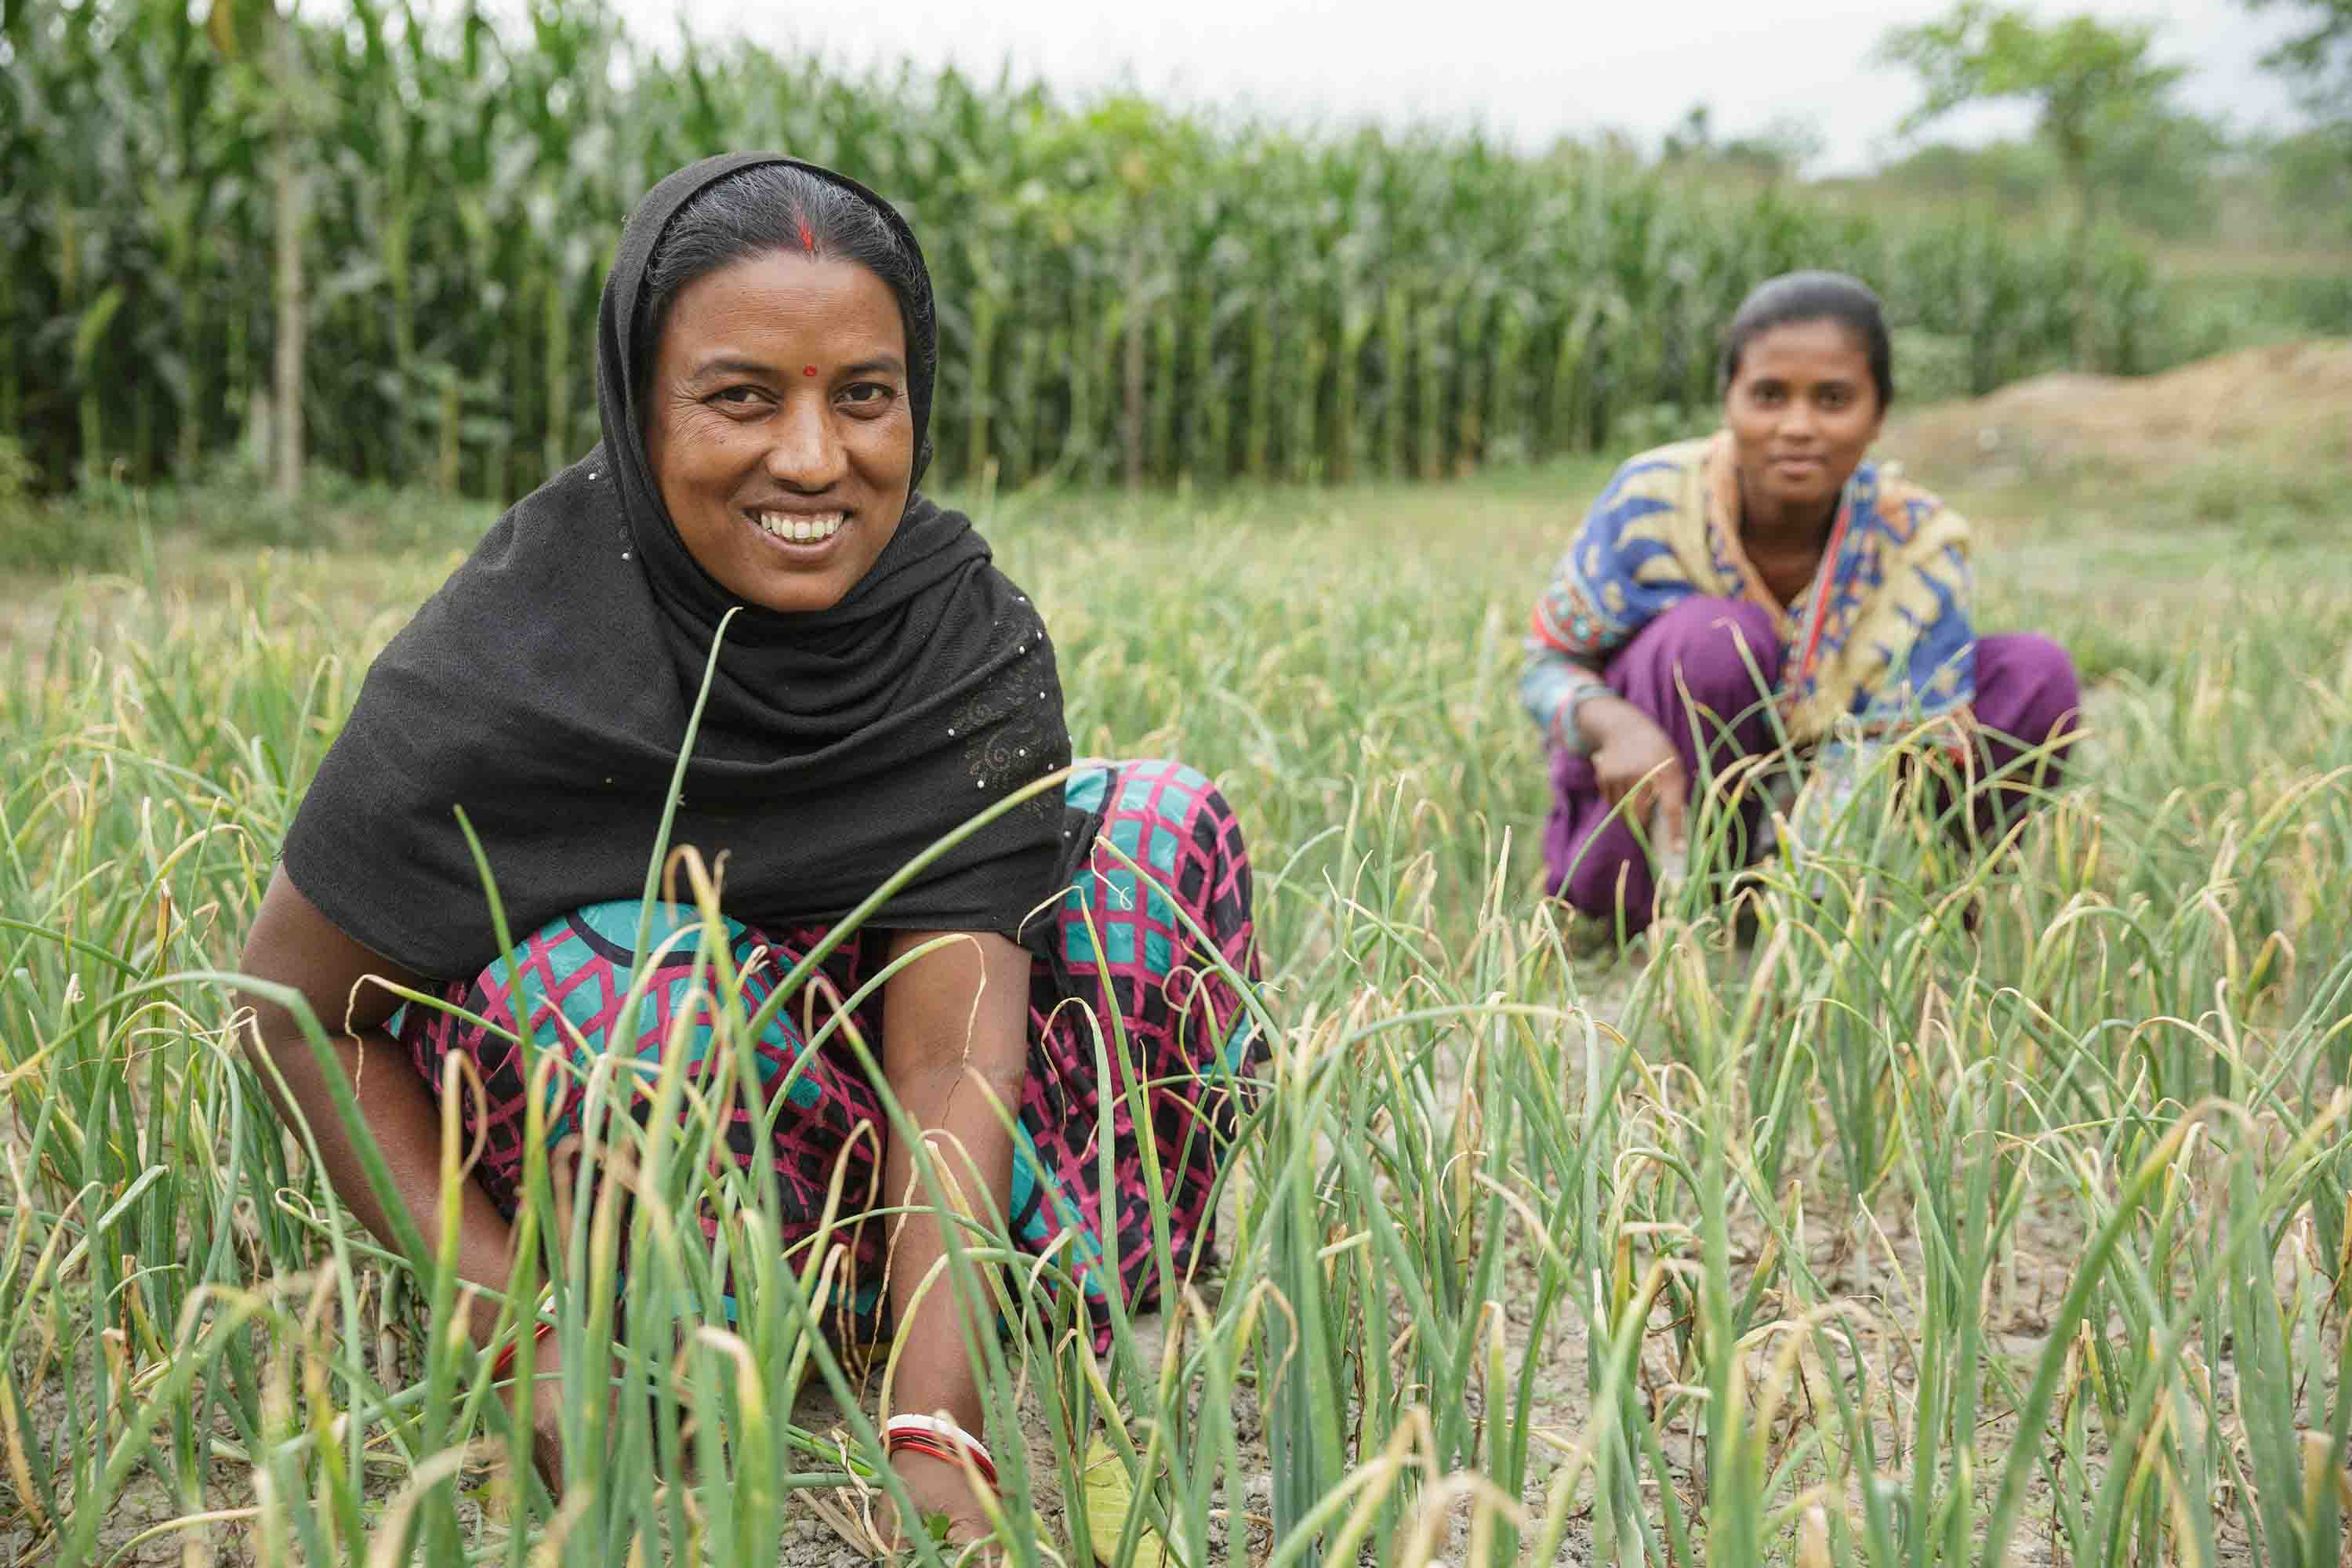 Lakshmi Kisku and her daughter Rashmi work in their onion patch together.